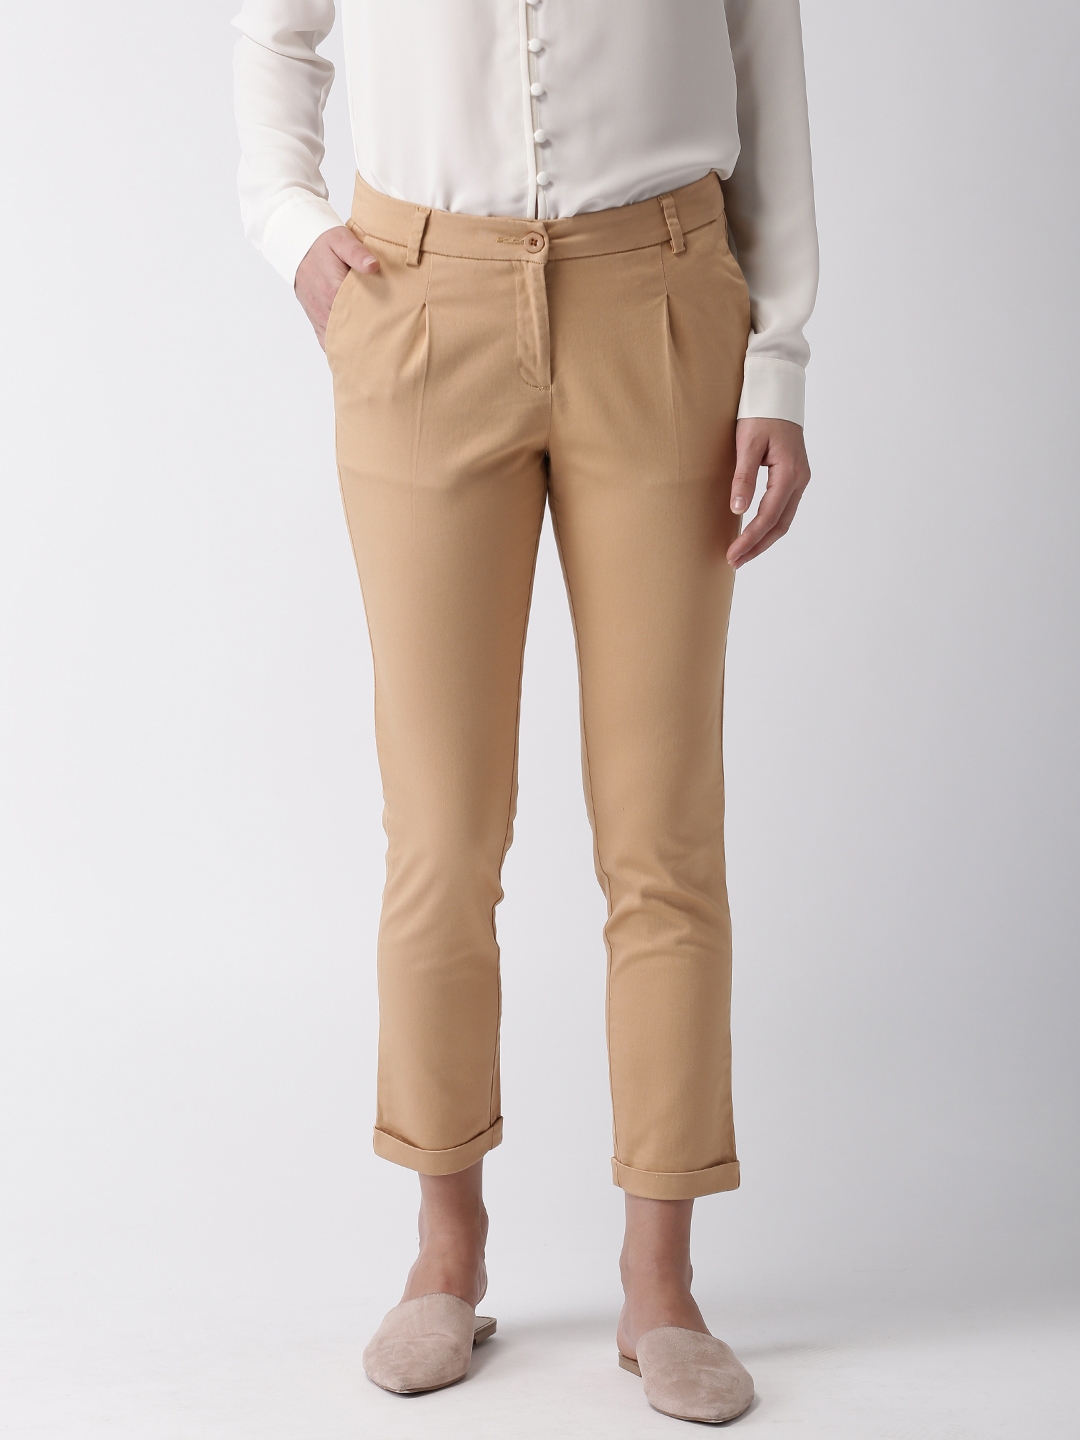 Fashion time  New arrival cotrise pant for ladies  Facebook